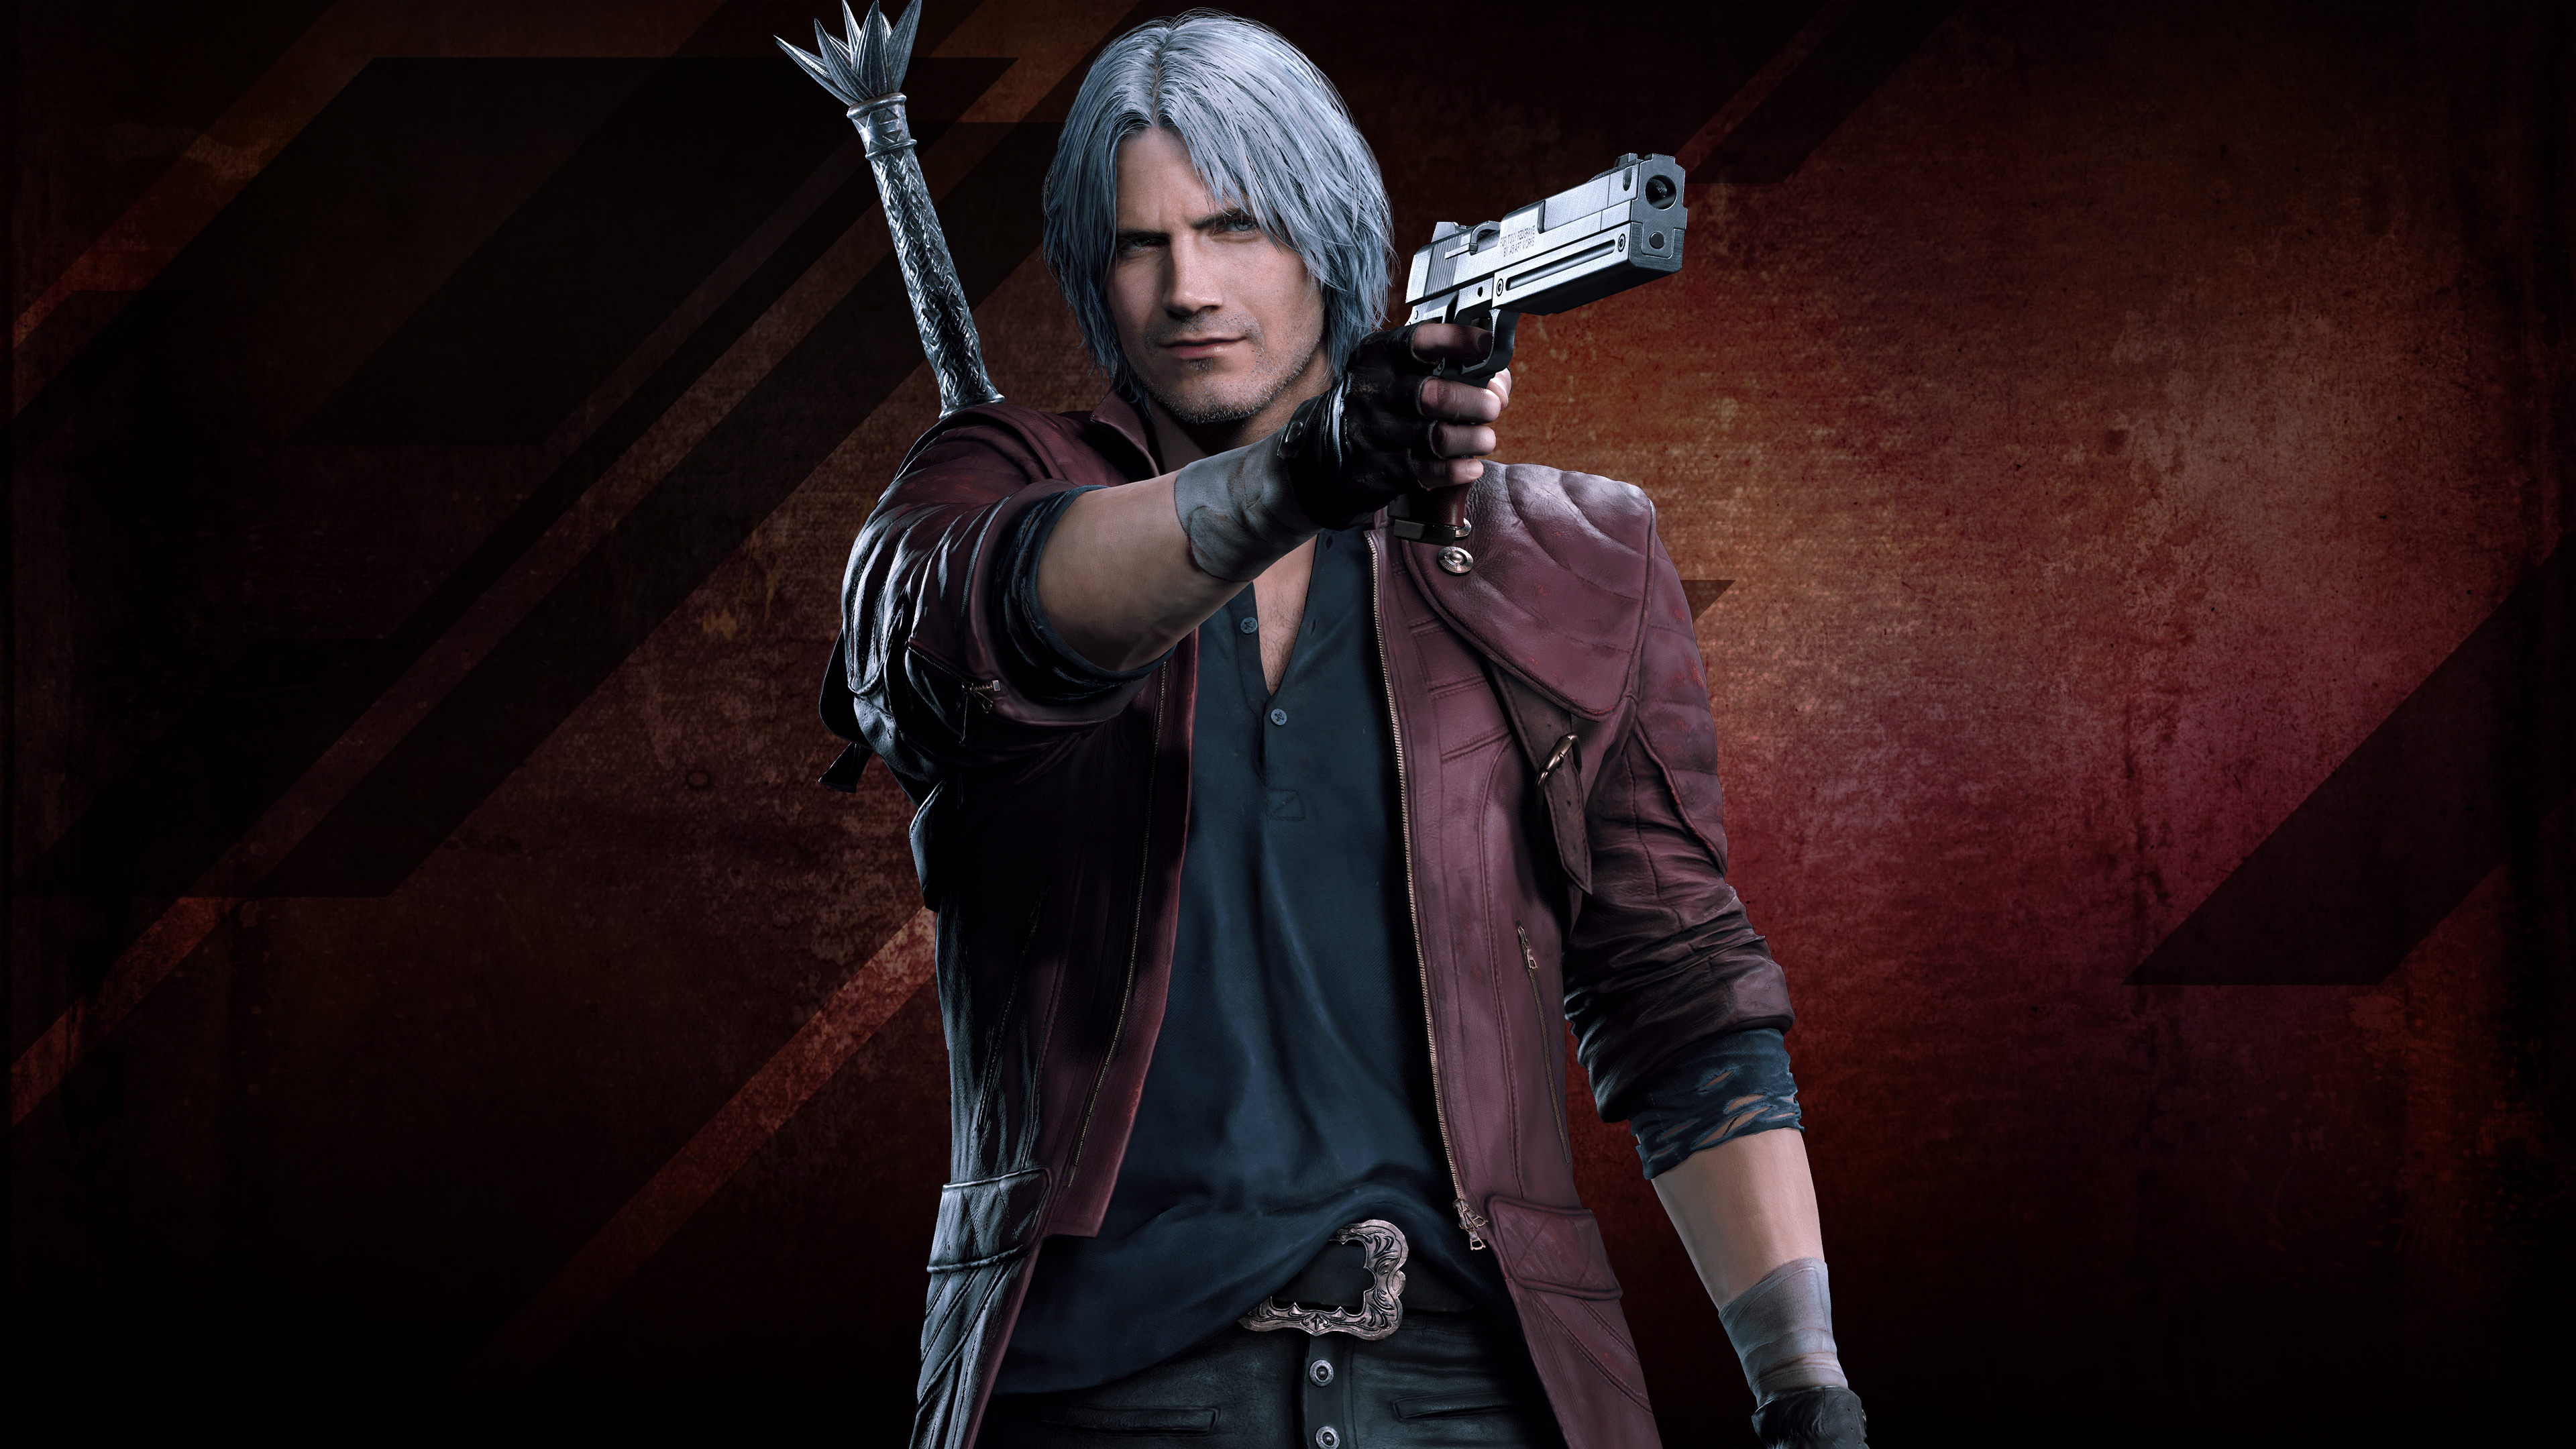 dante devil may cry do your homework first